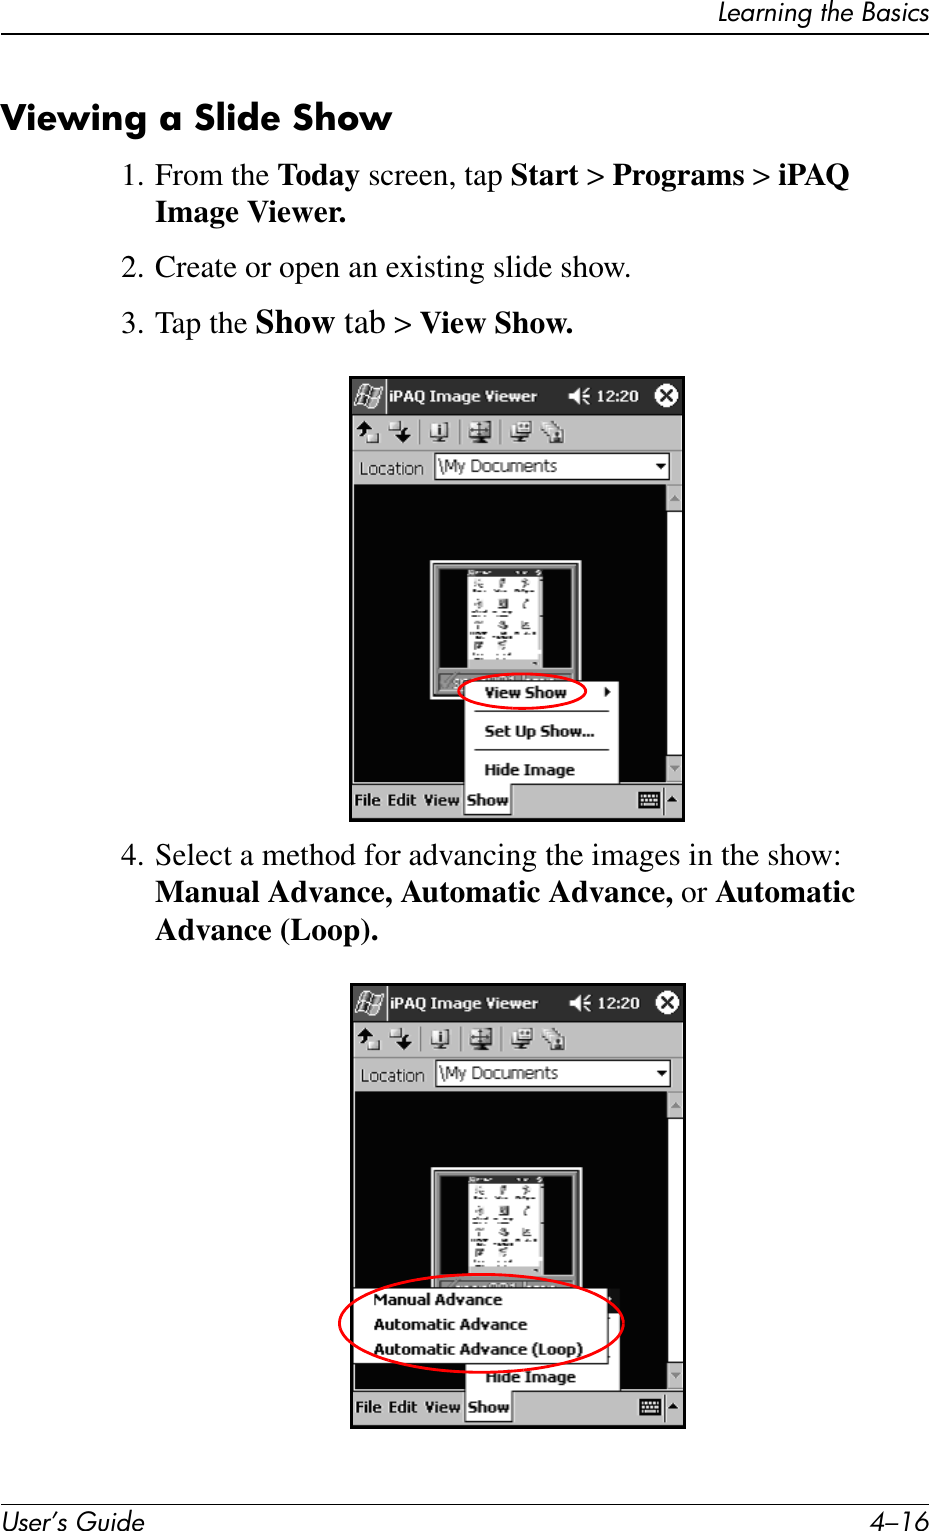 User’s Guide 4–16Learning the BasicsViewing a Slide Show1. From the Today screen, tap Start &gt; Programs &gt; iPAQ Image Viewer.2. Create or open an existing slide show.3. Tap the Show tab &gt; View Show.4. Select a method for advancing the images in the show: Manual Advance, Automatic Advance, or Automatic Advance (Loop).